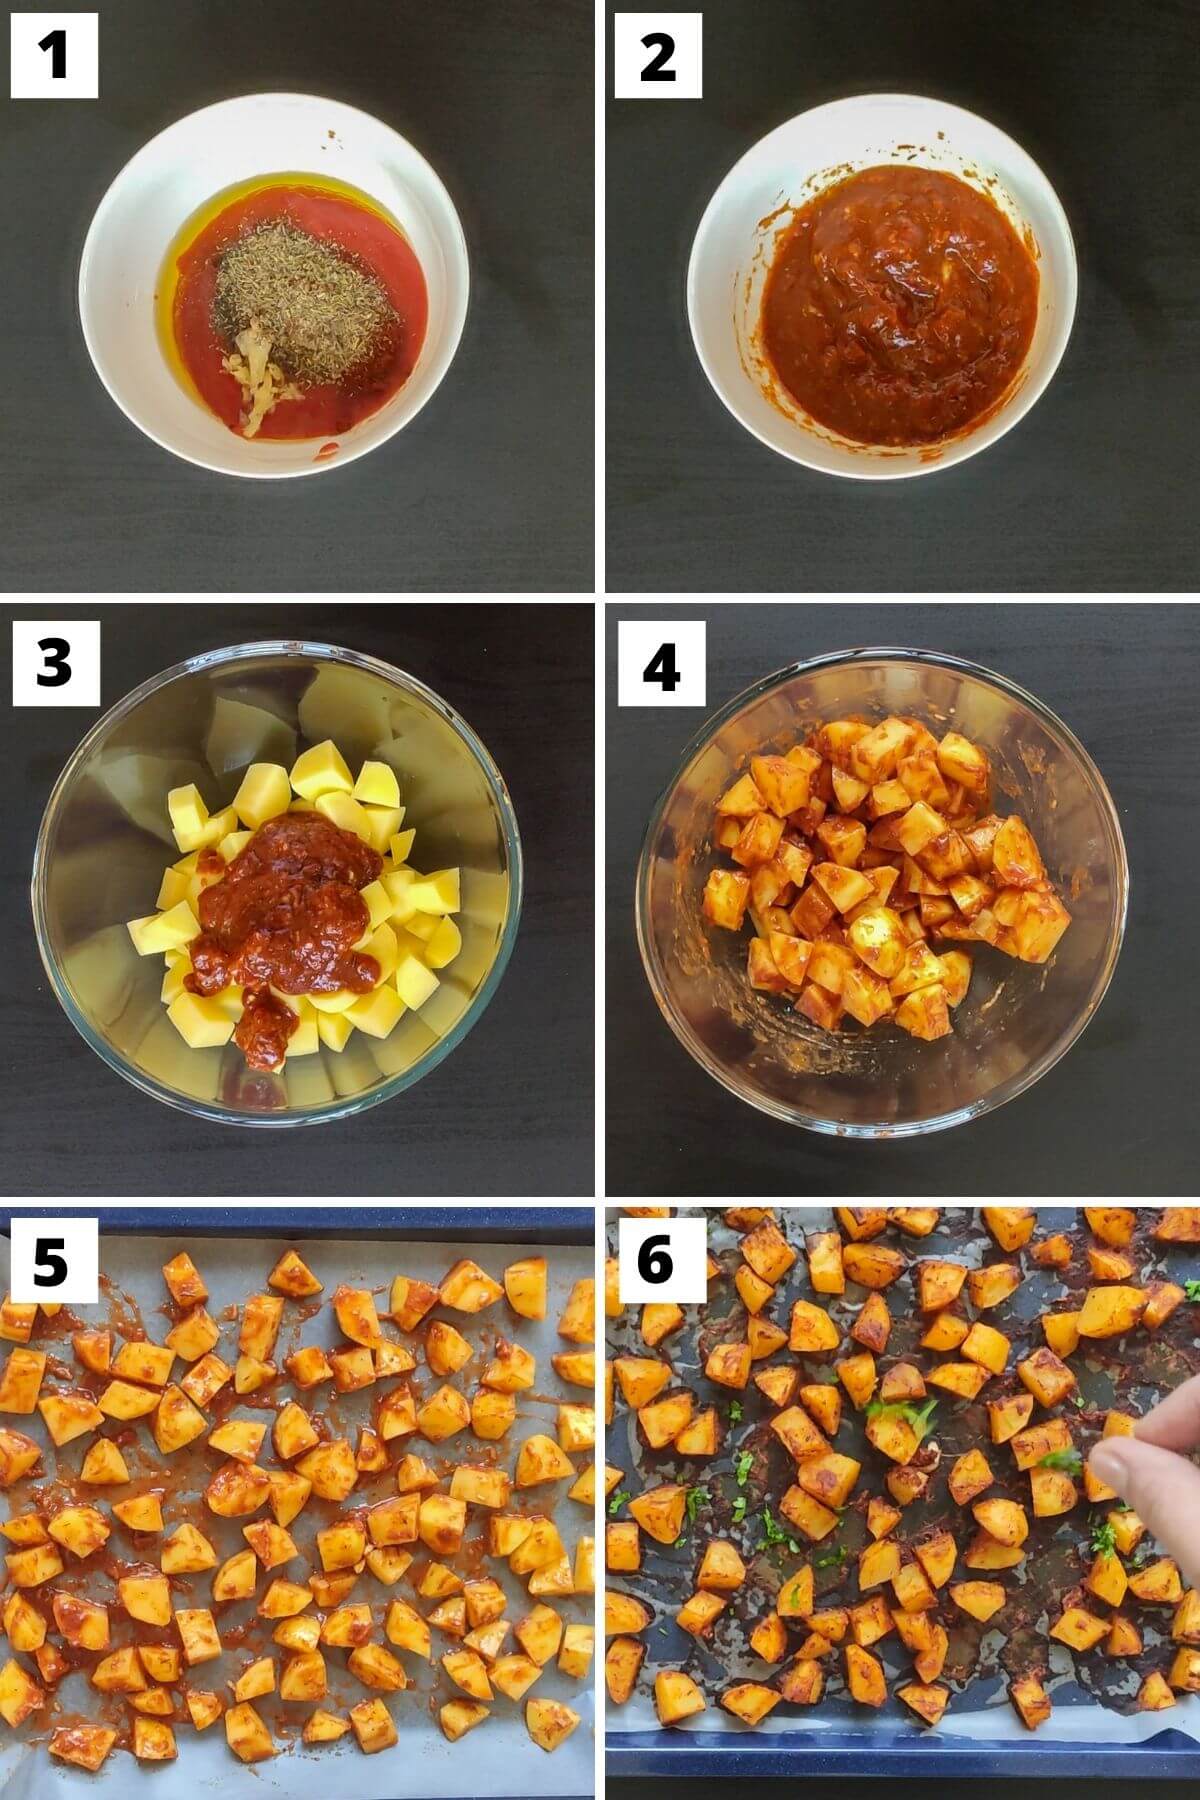 Collage of images of steps 1 to 6 of Spanish potatoes recipe.